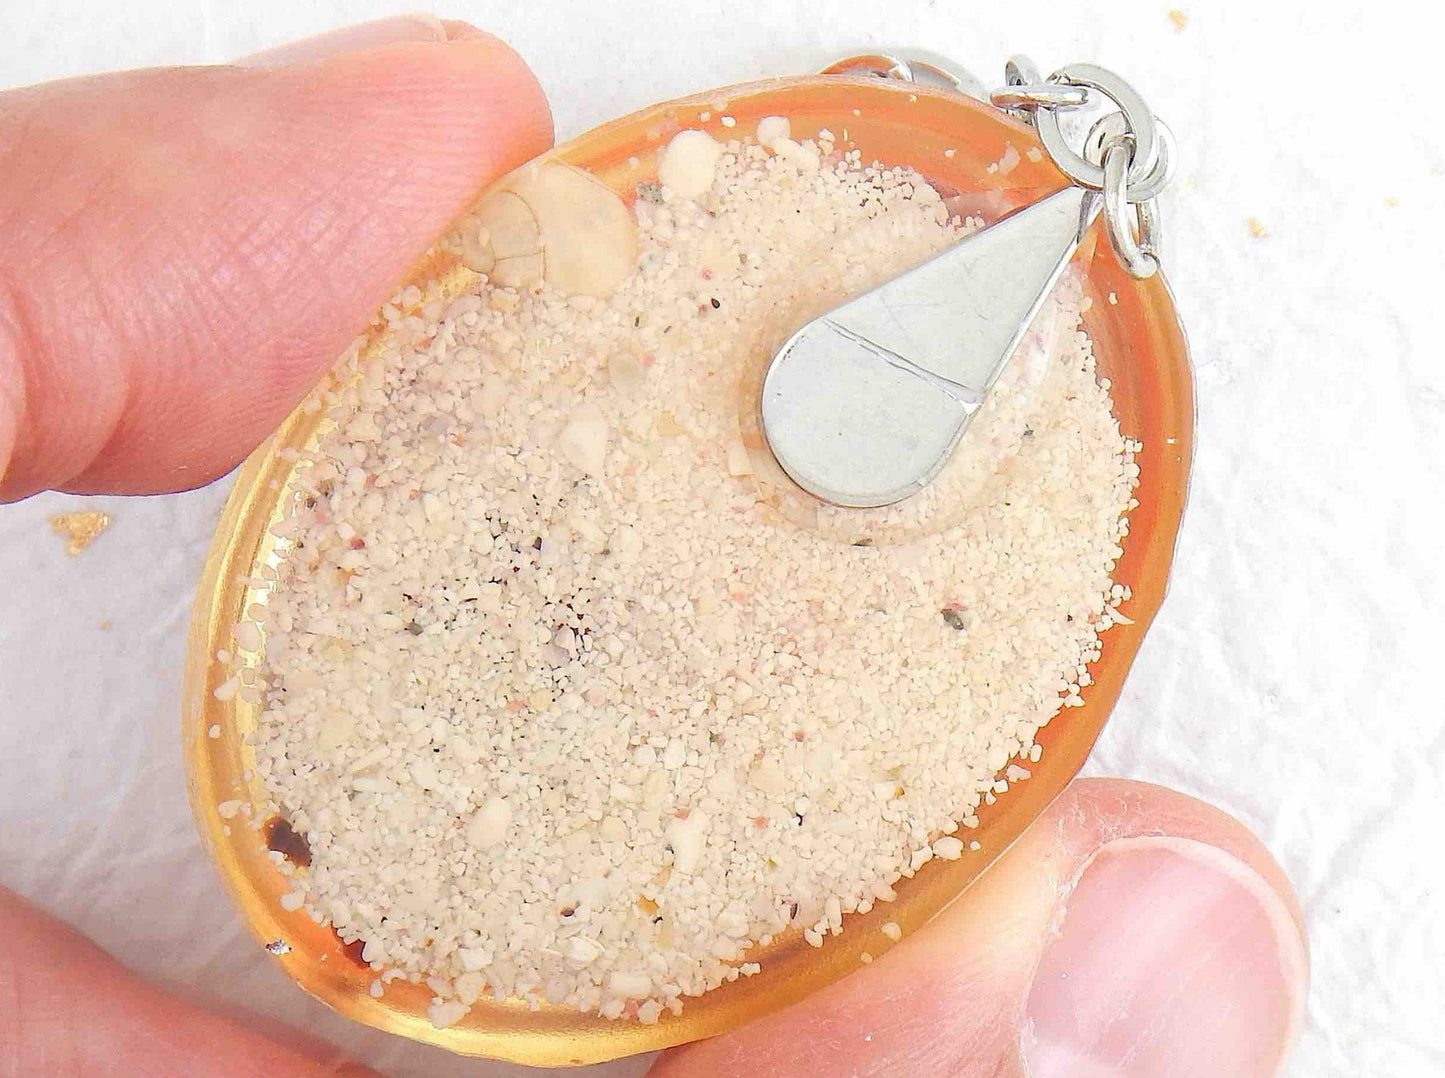 Keychain with handmade resin oval, white beach sand, red and orange glass and shells, stainless steel chain